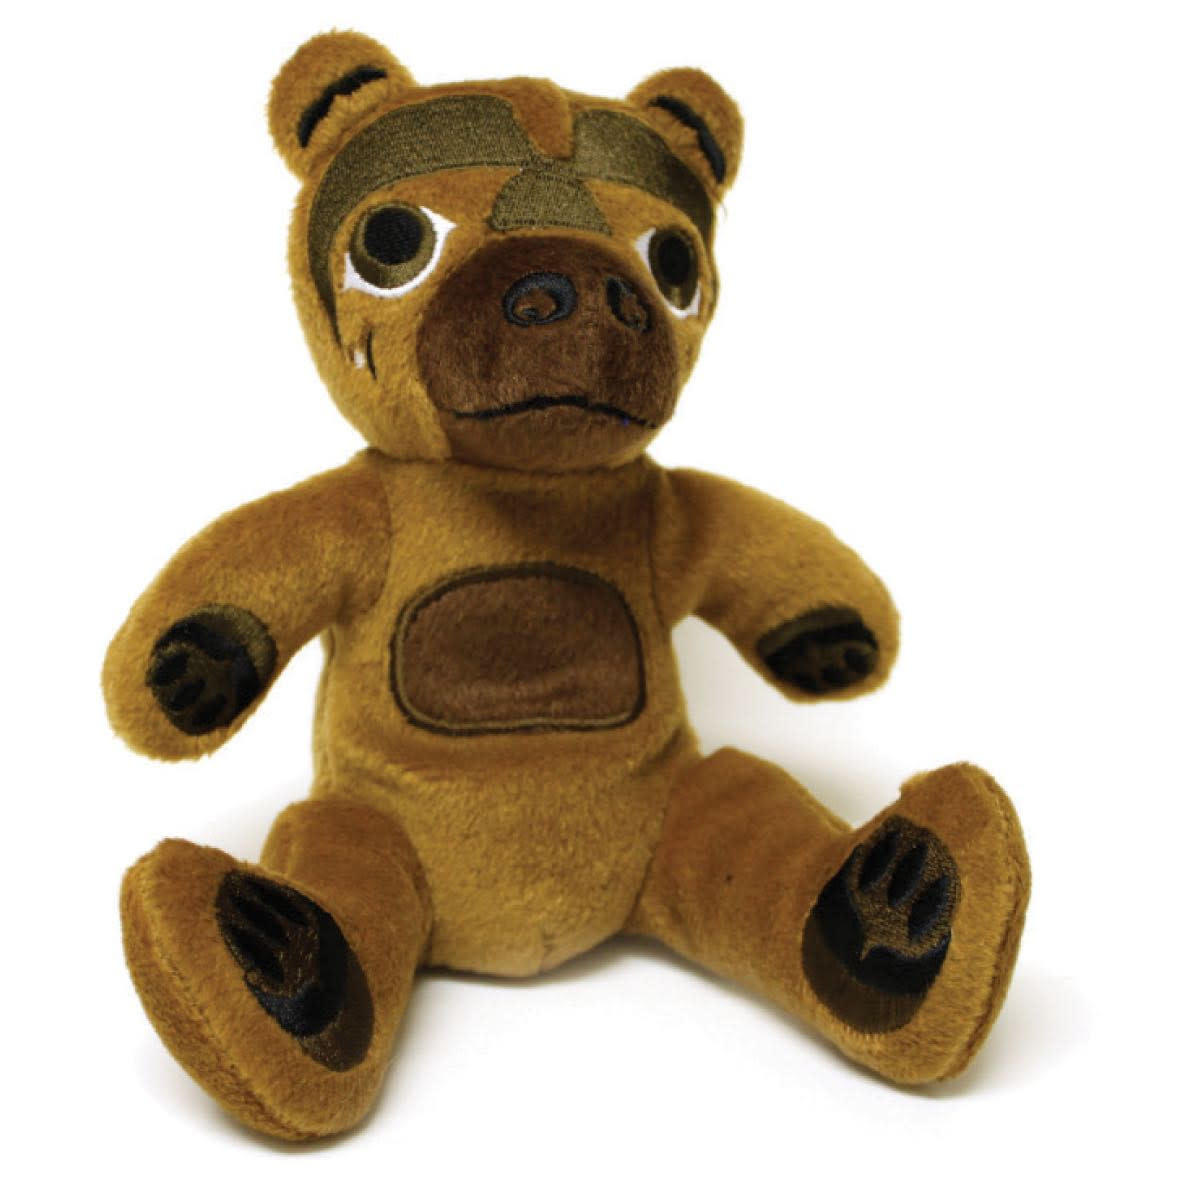 Plush Toy - Grizzly the Bear by Kelly Robinson-1